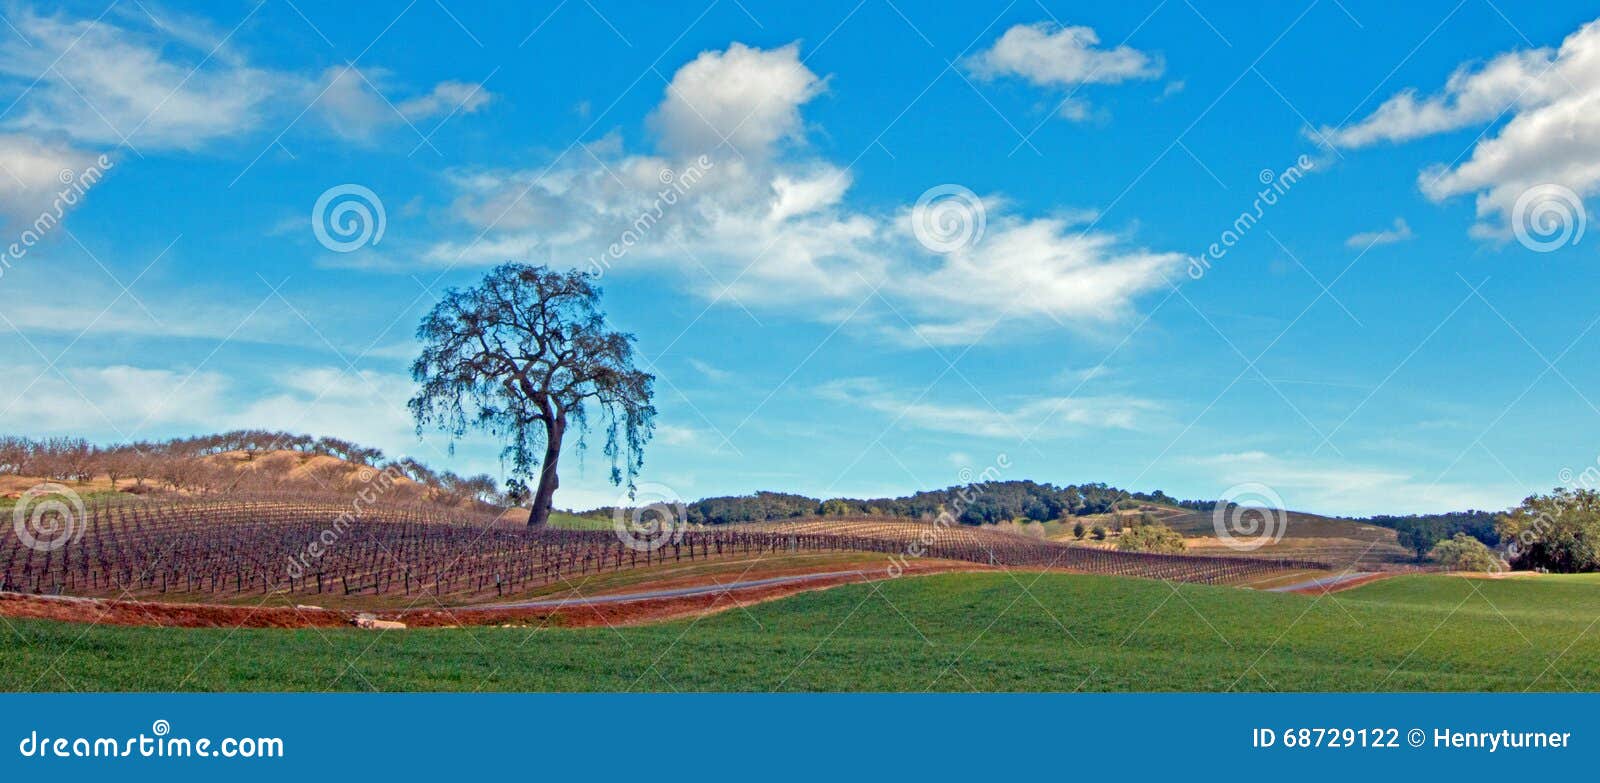 lone tree in paso robles wine country scenery